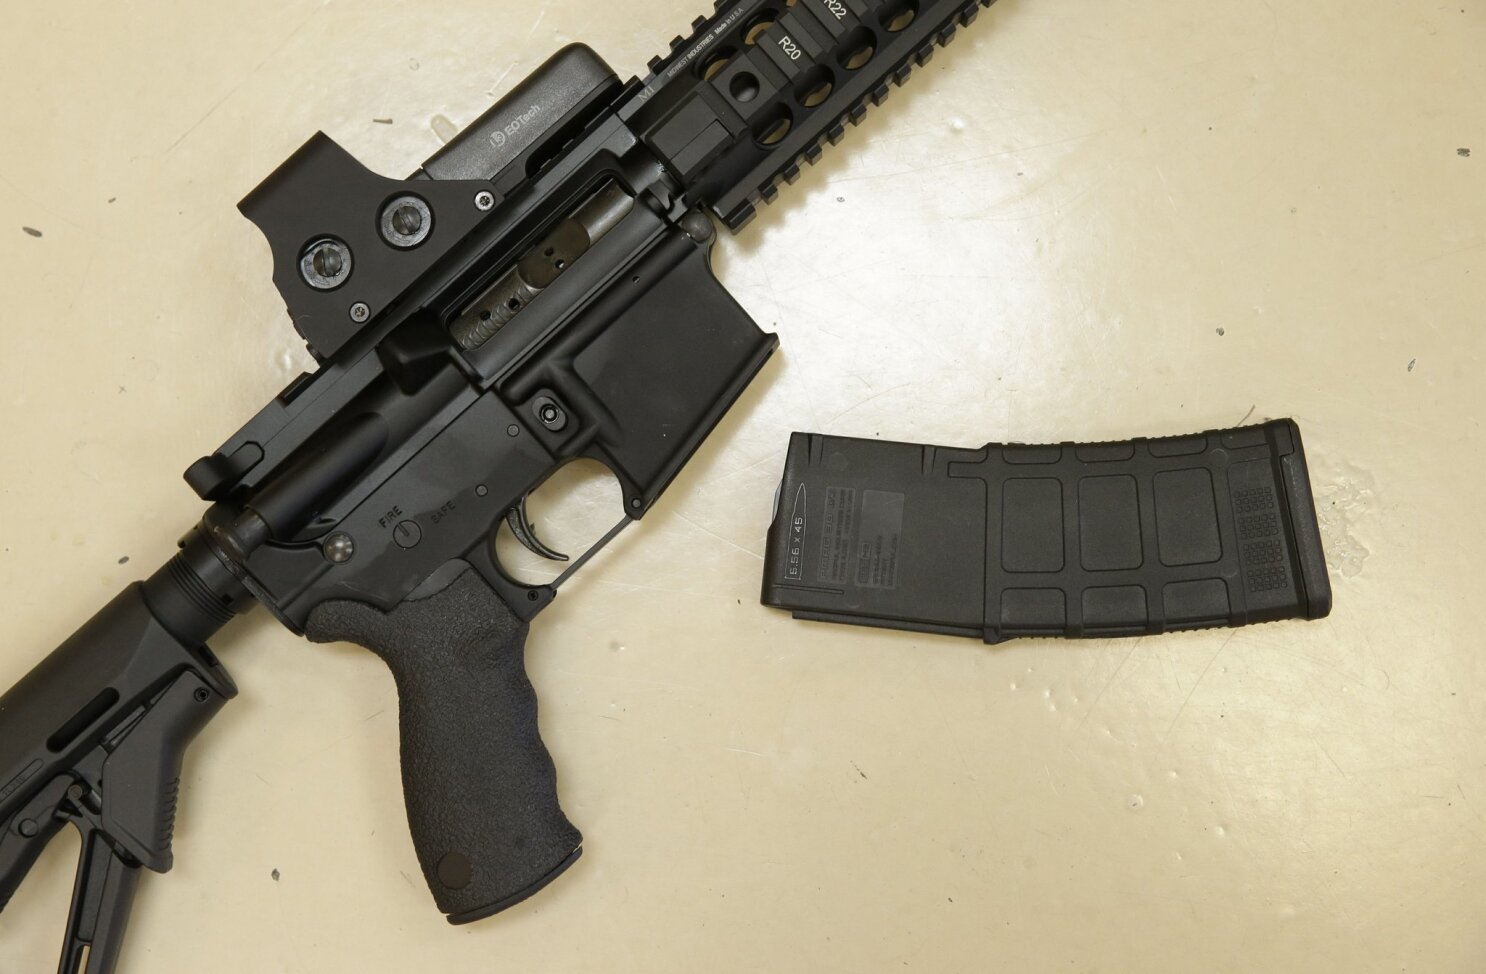 San Diego gun owners sue to overturn California's ban on assault weapons - The San Diego Union-Tribune